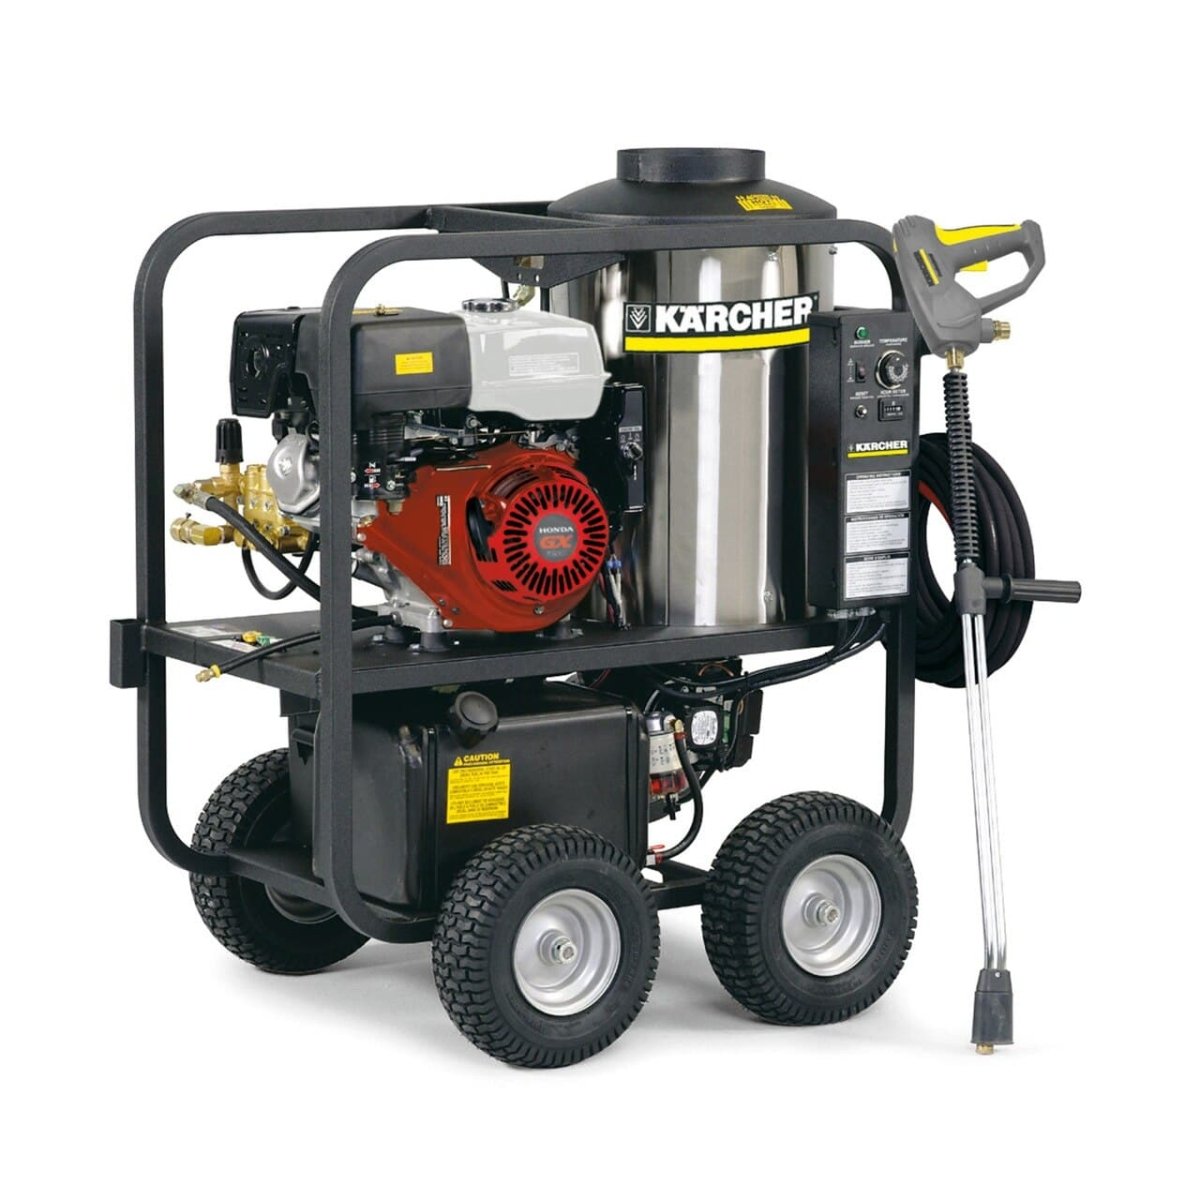 1075BE Compact, Gas Engine Hot Water Pressure Washer 4GPM @ 3500 PSI -  1.110-088.0 - Pressure Washers & Industrial Cleaning Equipment